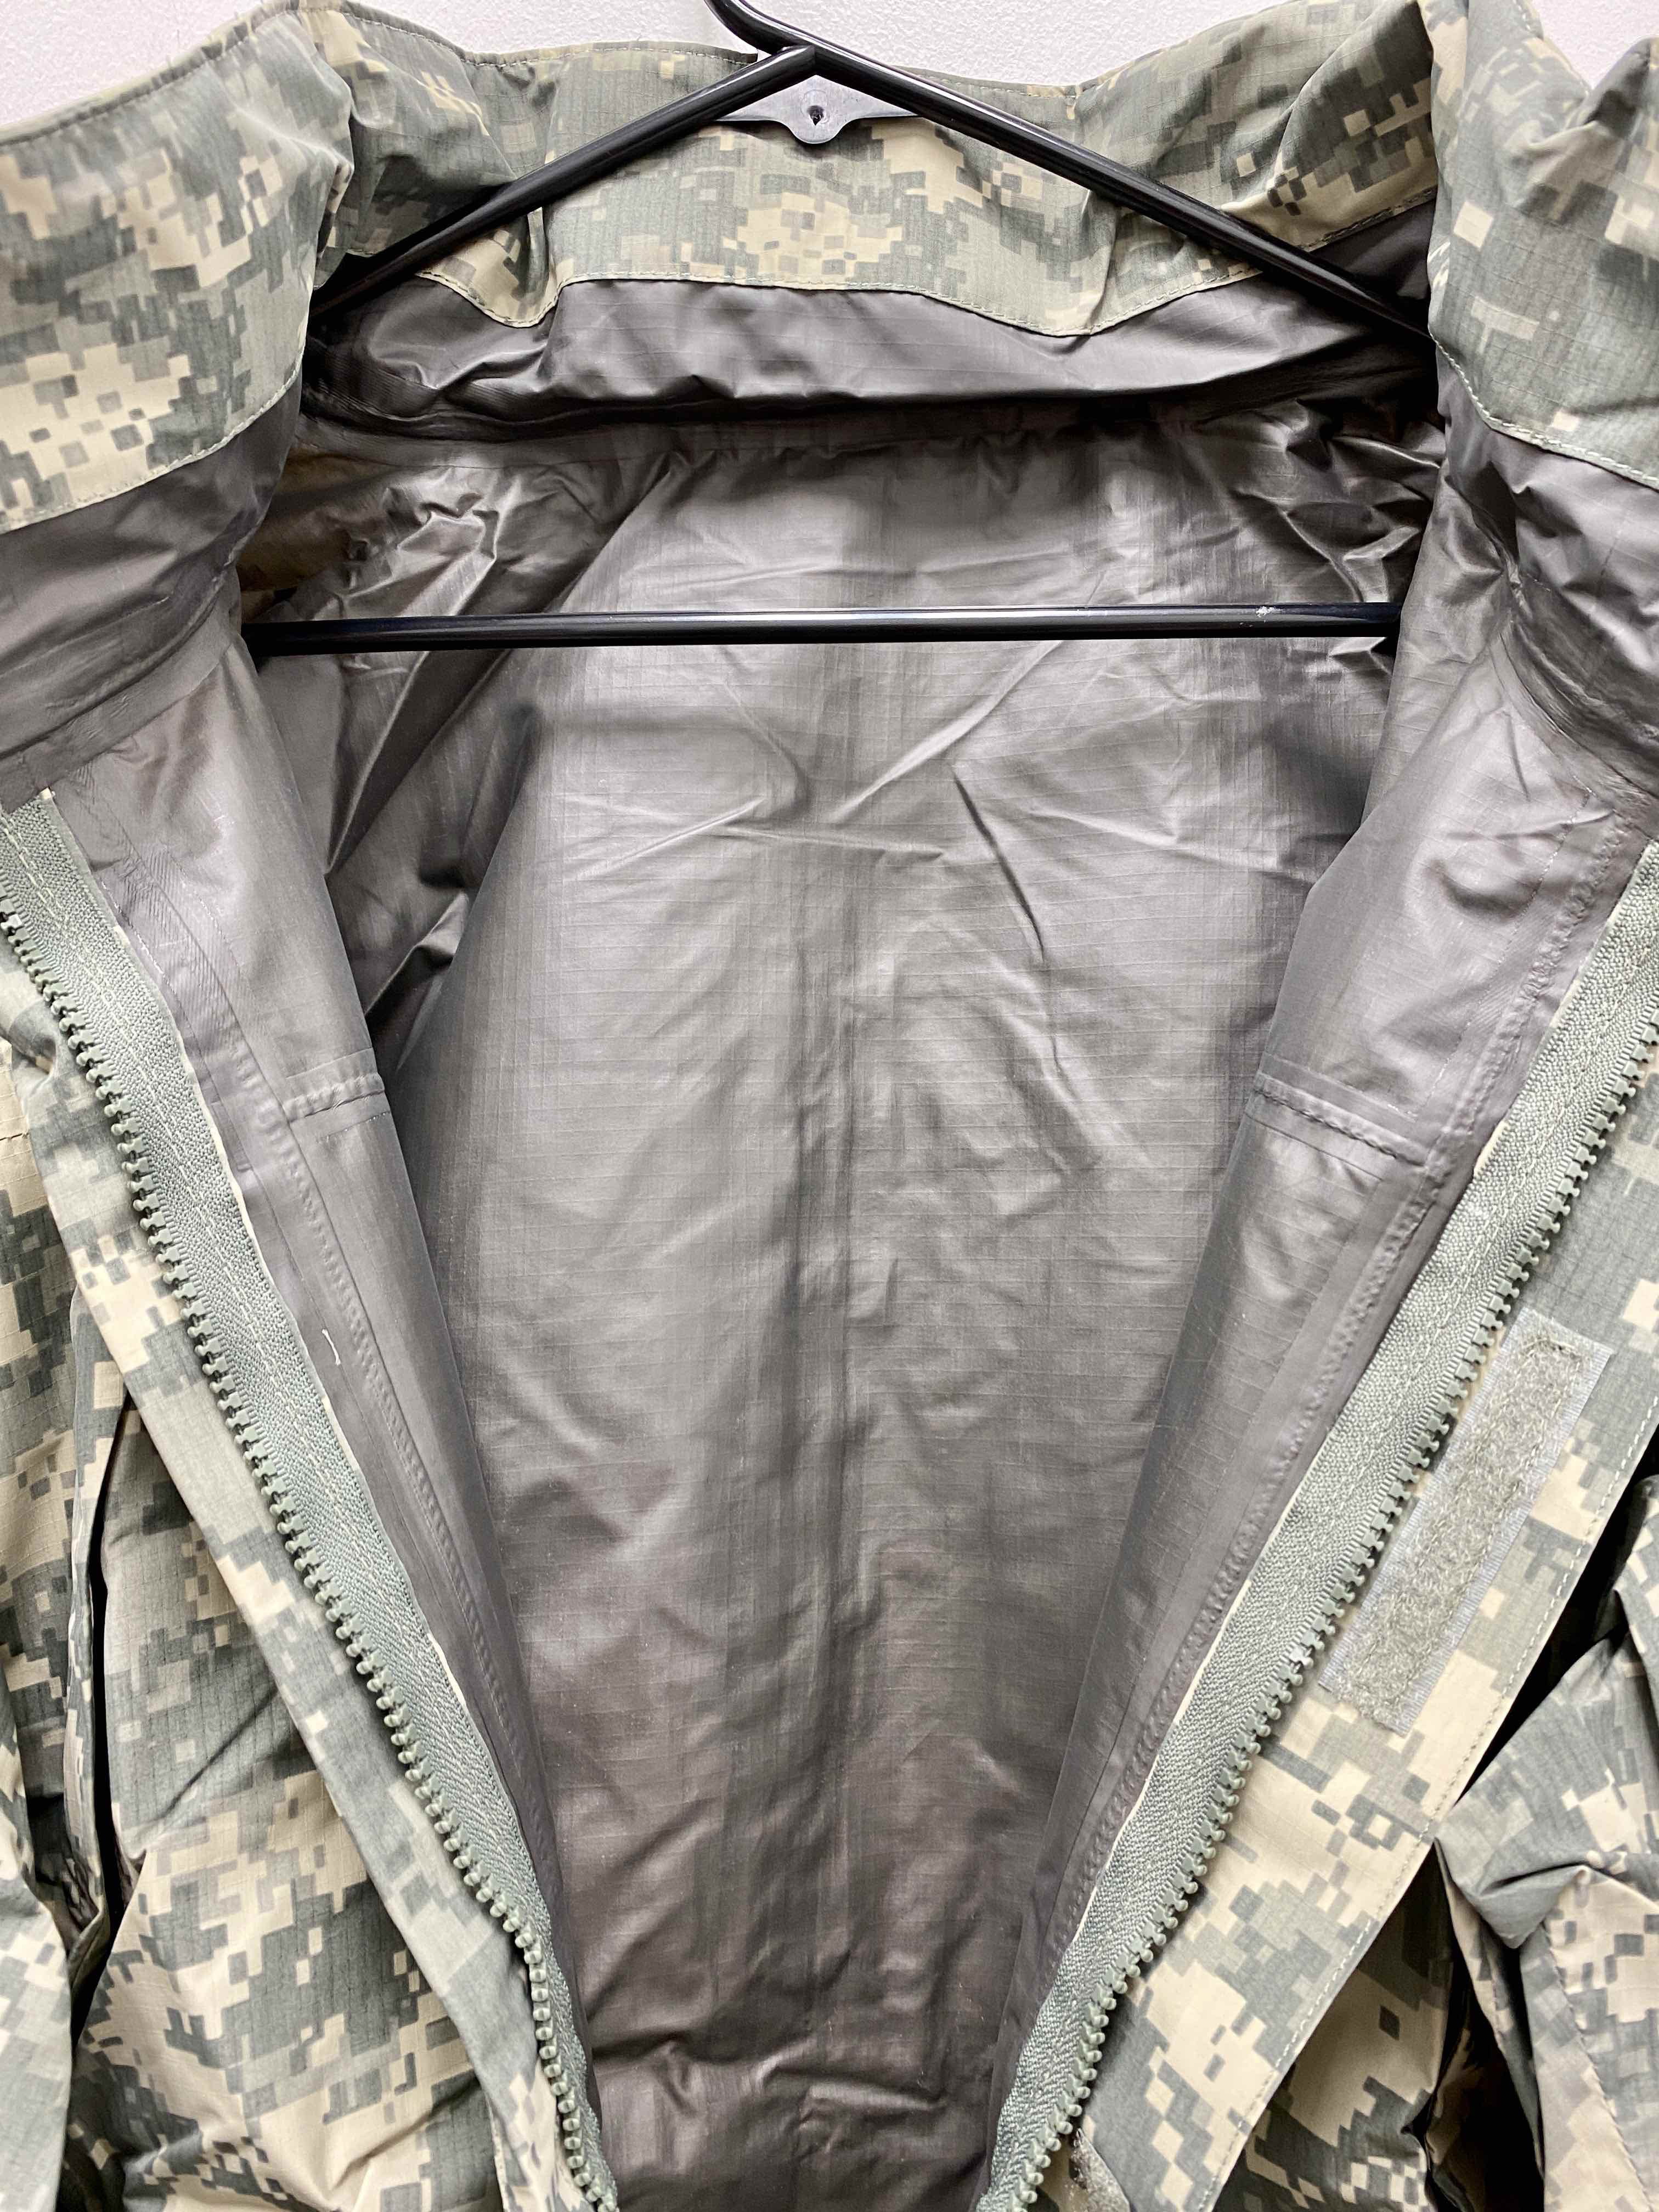 New Us Army Issue Ecwcs Gen III Level 6 Gore Tex Acu Digital Extreme  Cold/Wet Weather Jacket - Medium Long.